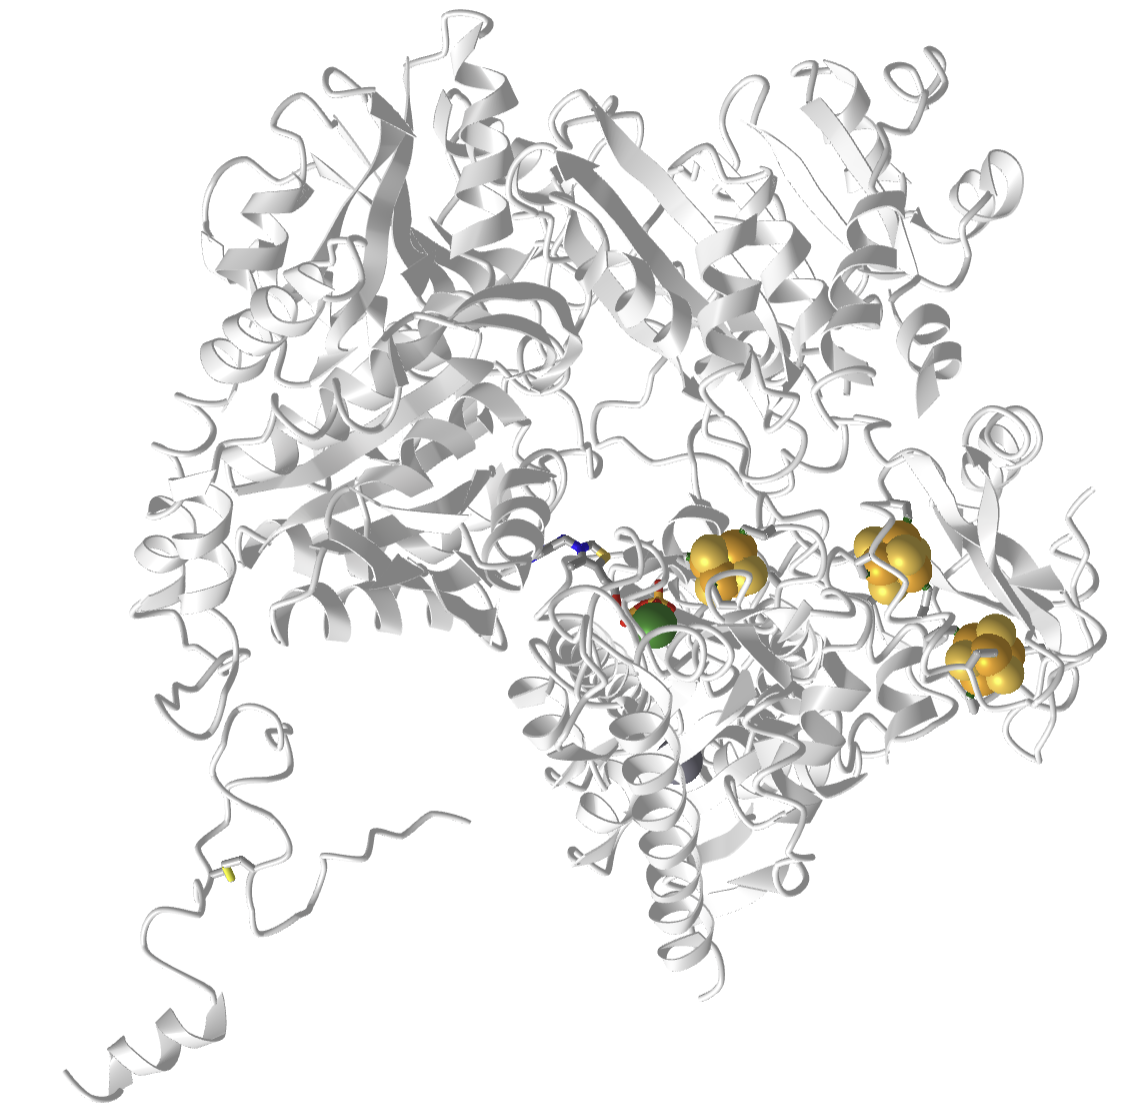 pyruvate ferredoxin oxidoreductase (PFOR) from Desulfocurvibacter africanus in anaerobic conditions (7PLM).png